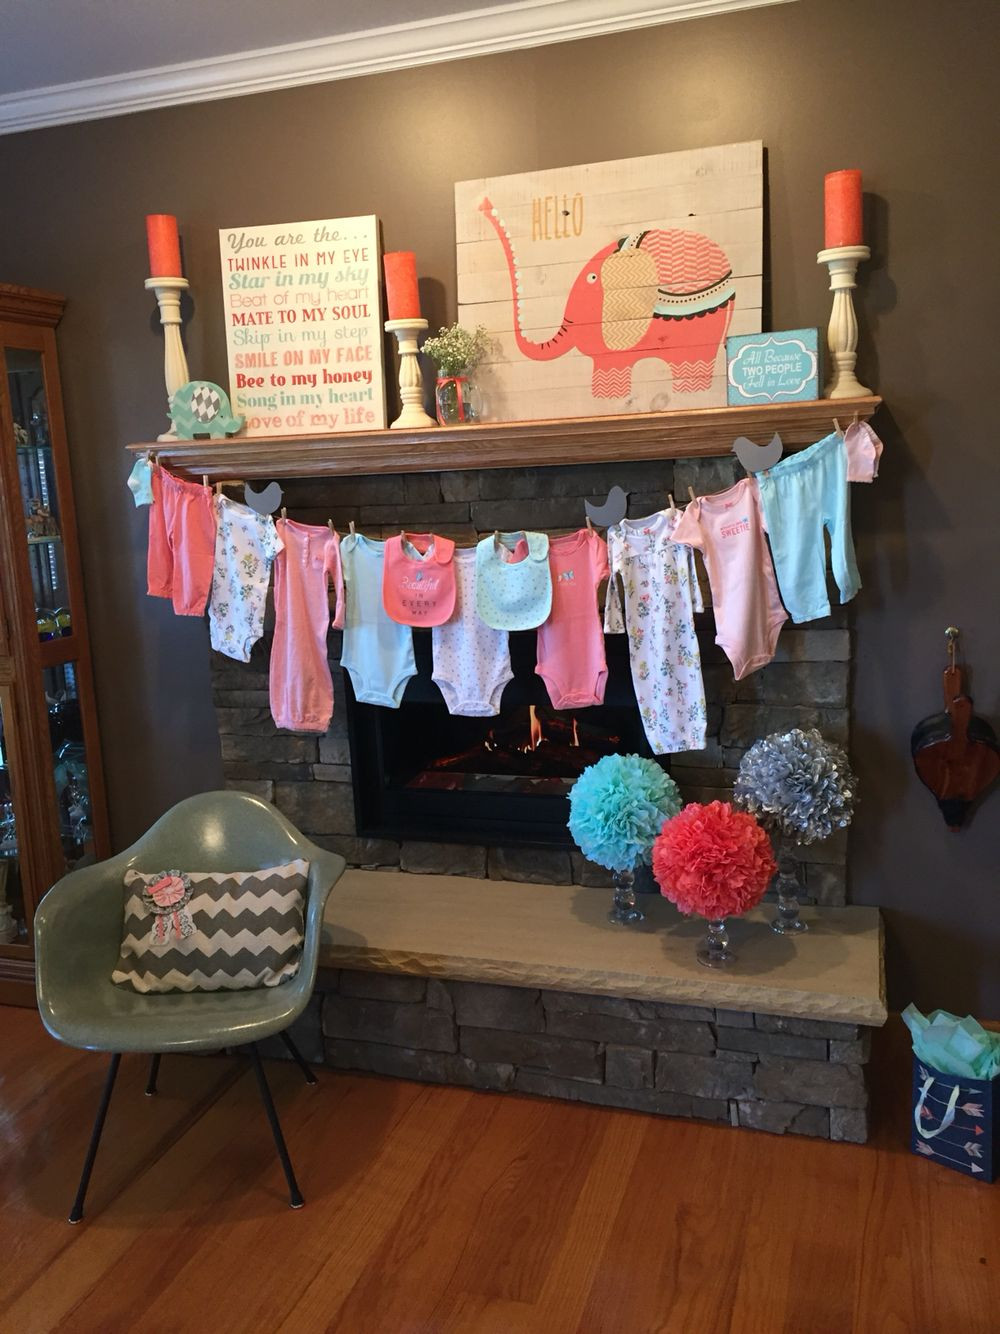 Coral Baby Shower Decor
 Baby shower mantel decorations coral and mint clothes